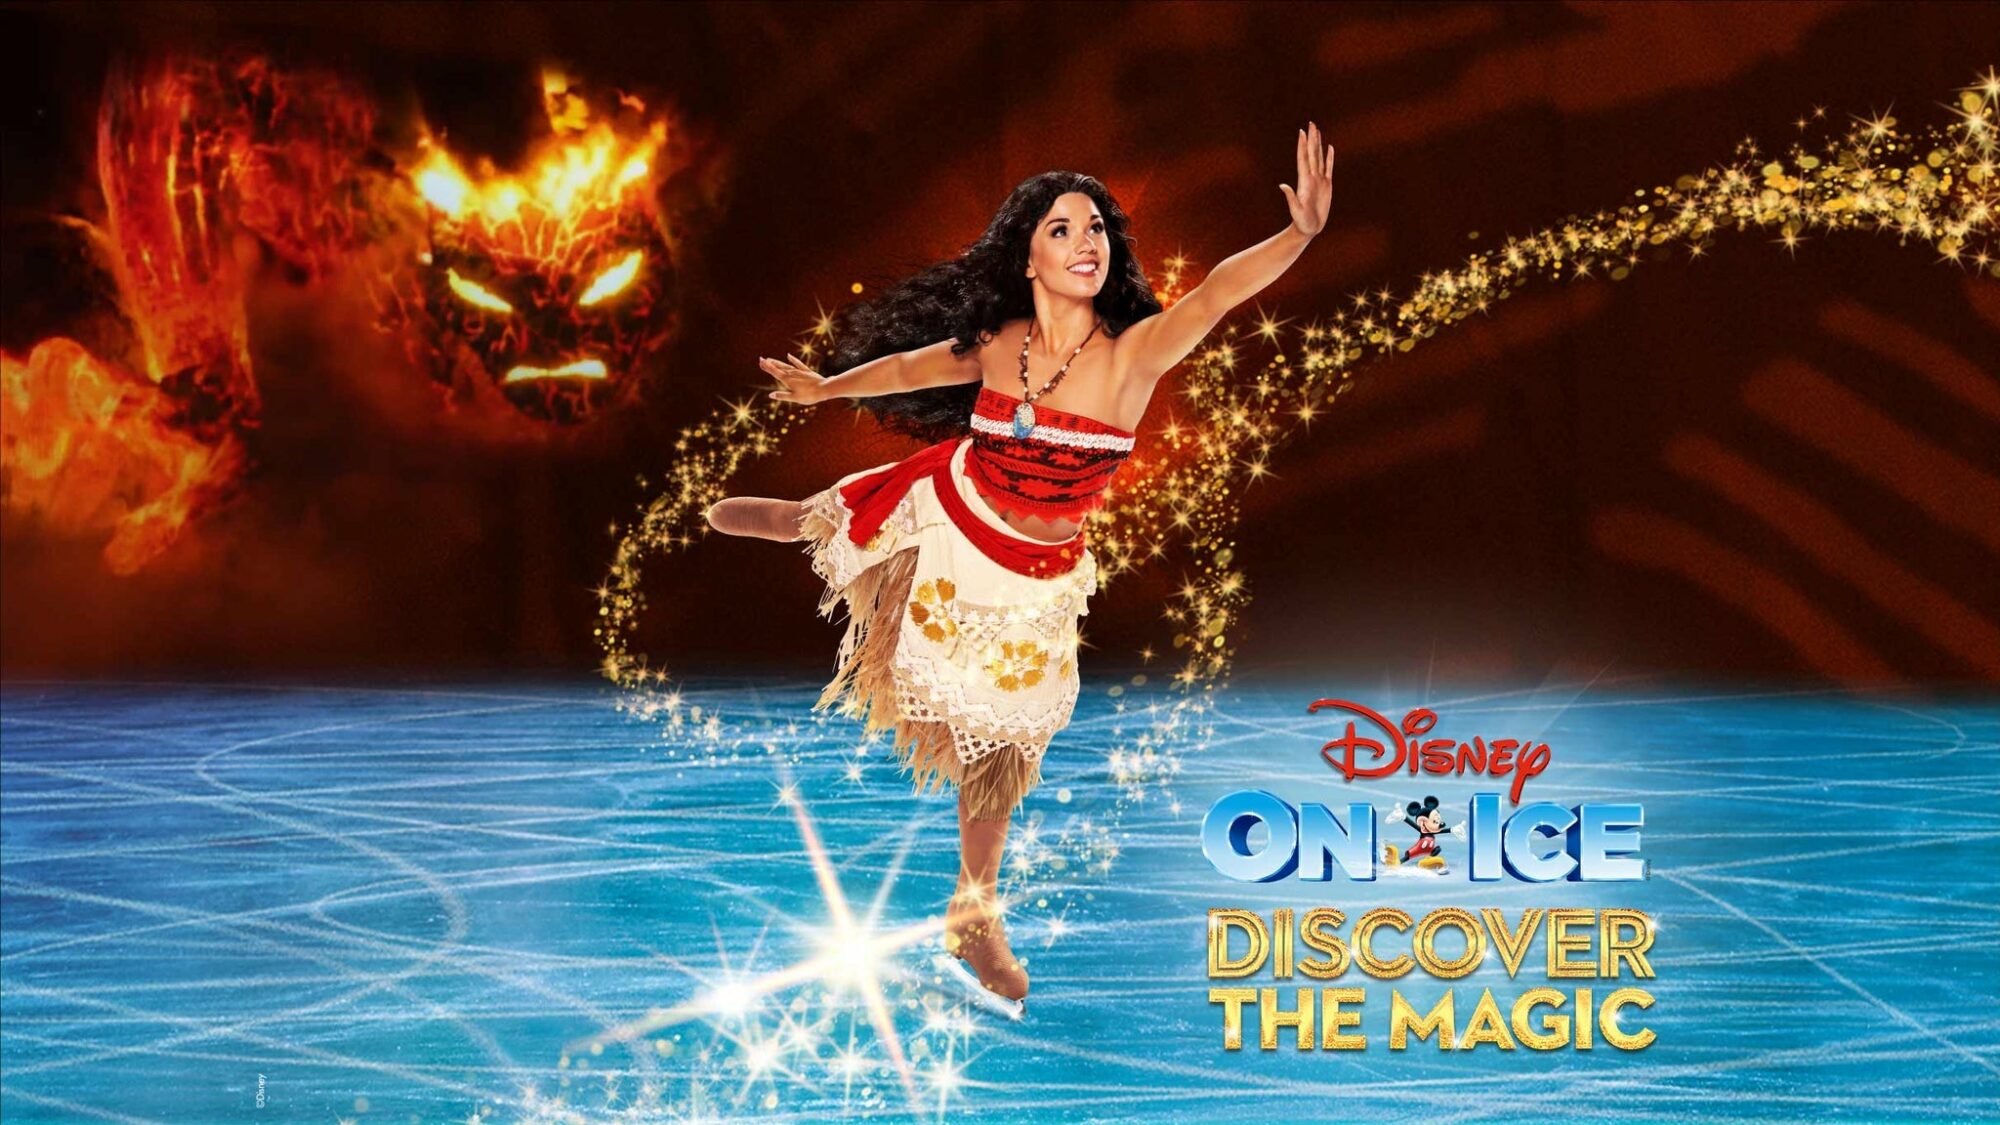 Image name Disney On Ice presents Discover the Magic at First Direct Arena Leeds the 1 image from the post Disney On Ice presents Discover the Magic at First Direct Arena, Leeds in Yorkshire.com.